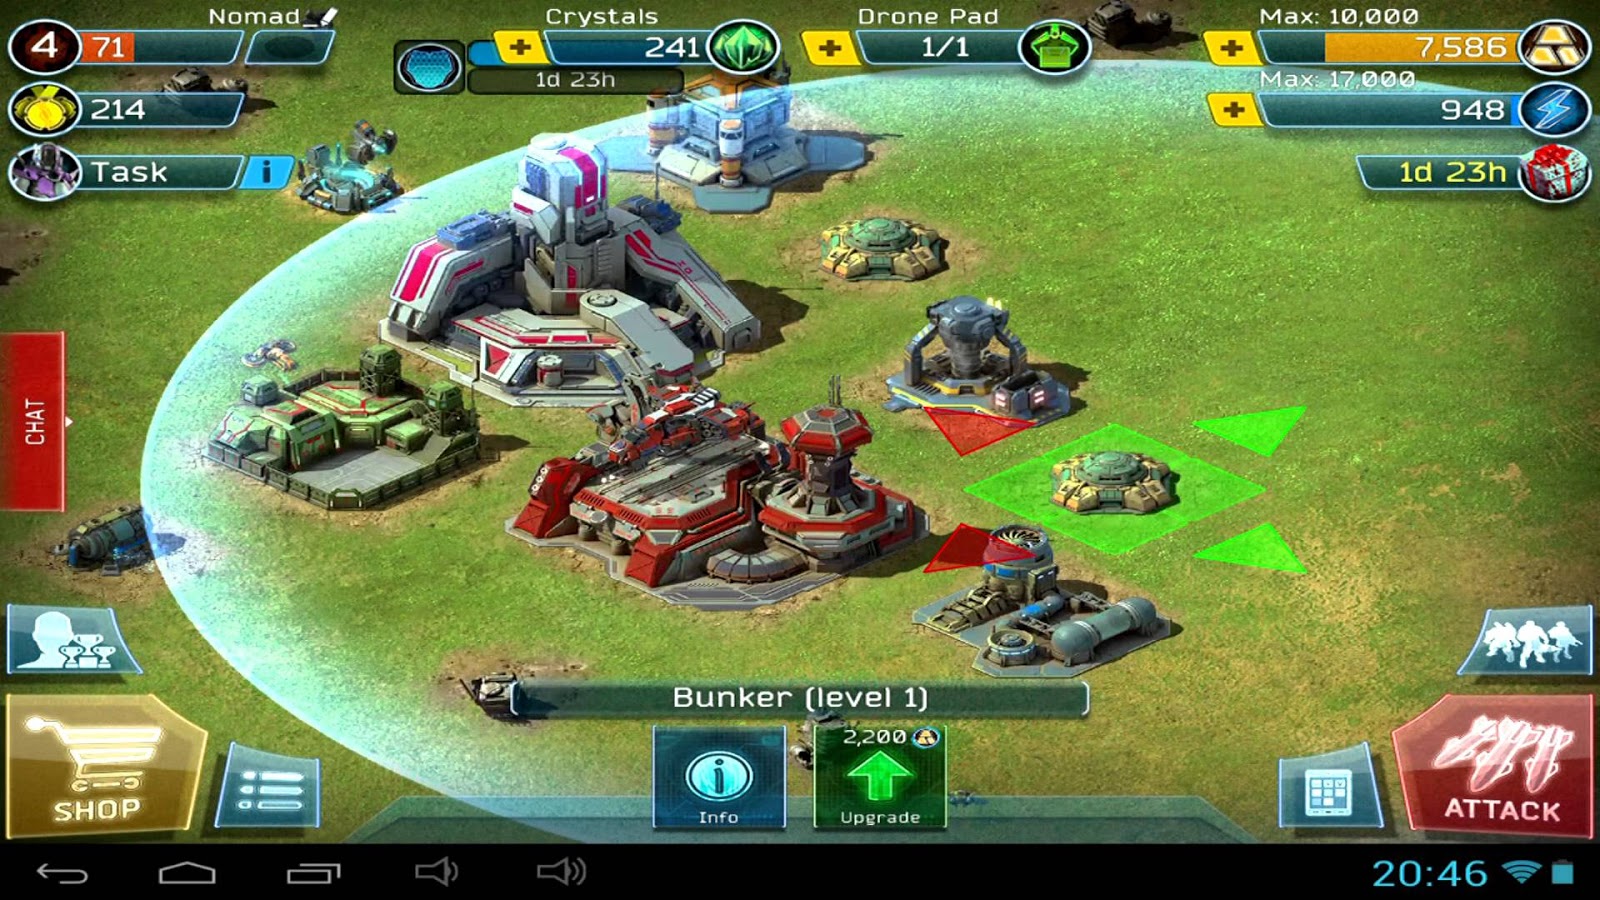 battle for the galaxy cheats tool v3.2 download